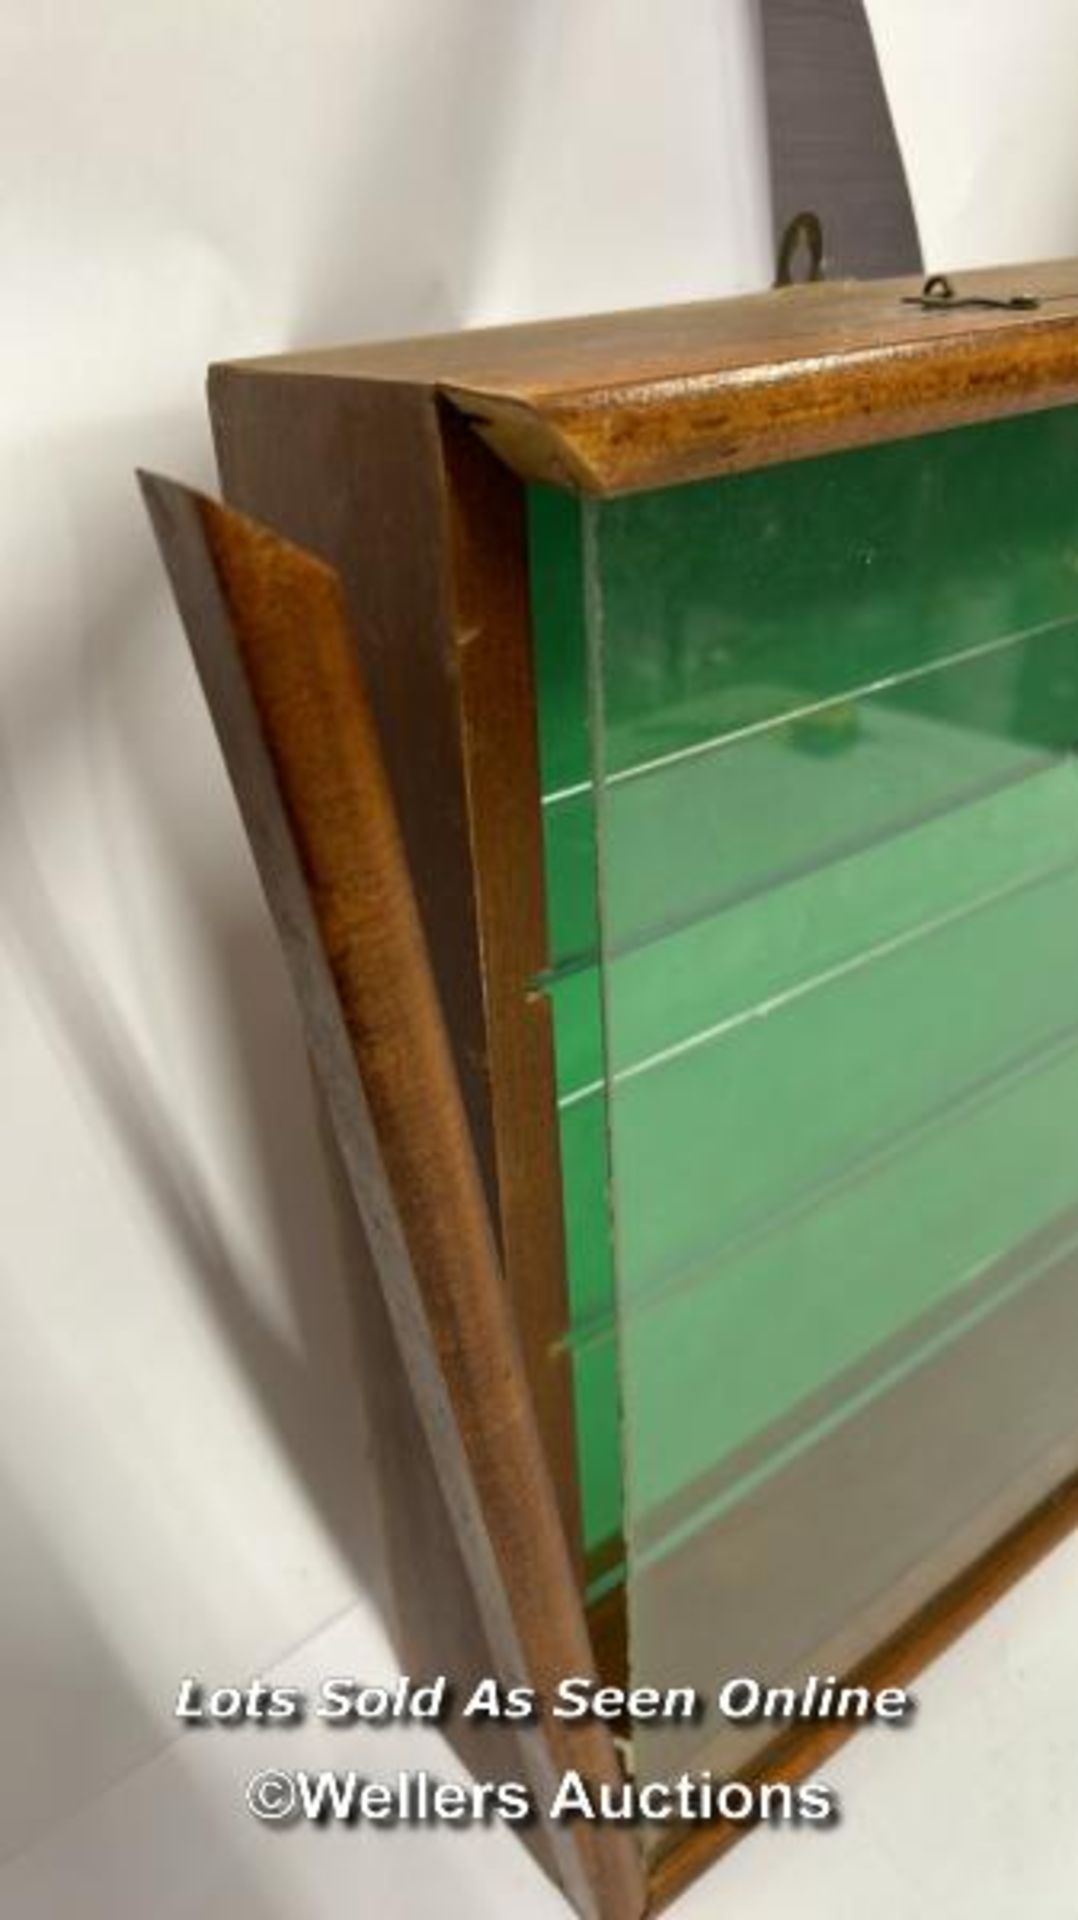 Wooden wall hanging display case with glass shelves, 86 x 43 x 11cm - Image 3 of 4